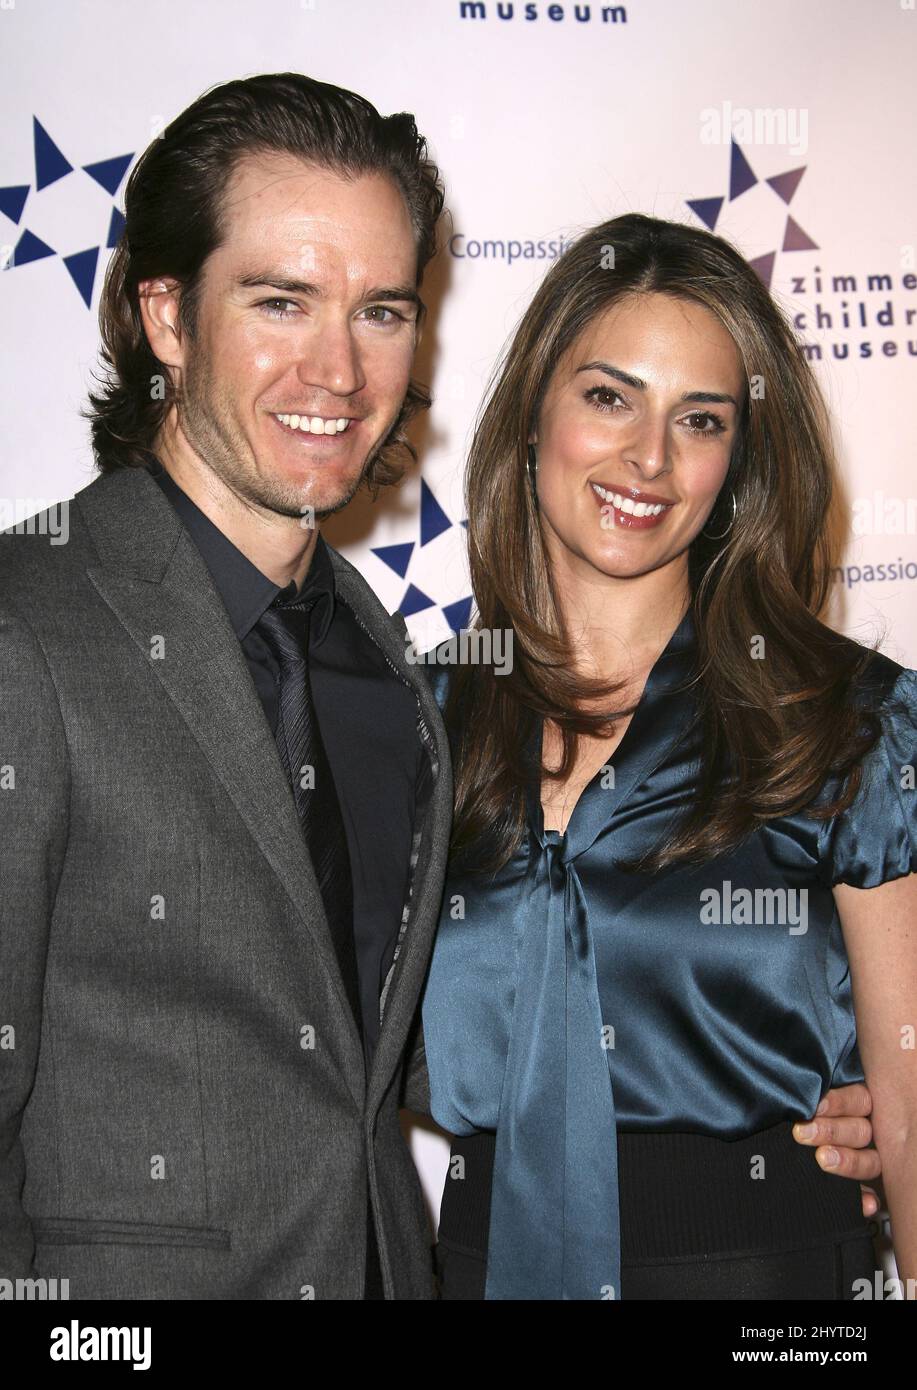 Mark-Paul Gosselaar and wife Lisa Ann Russell at the Zimmer Children's Museum 8th Annual Discovery Awards Dinner held at the Beverly Hills Hotel. Stock Photo